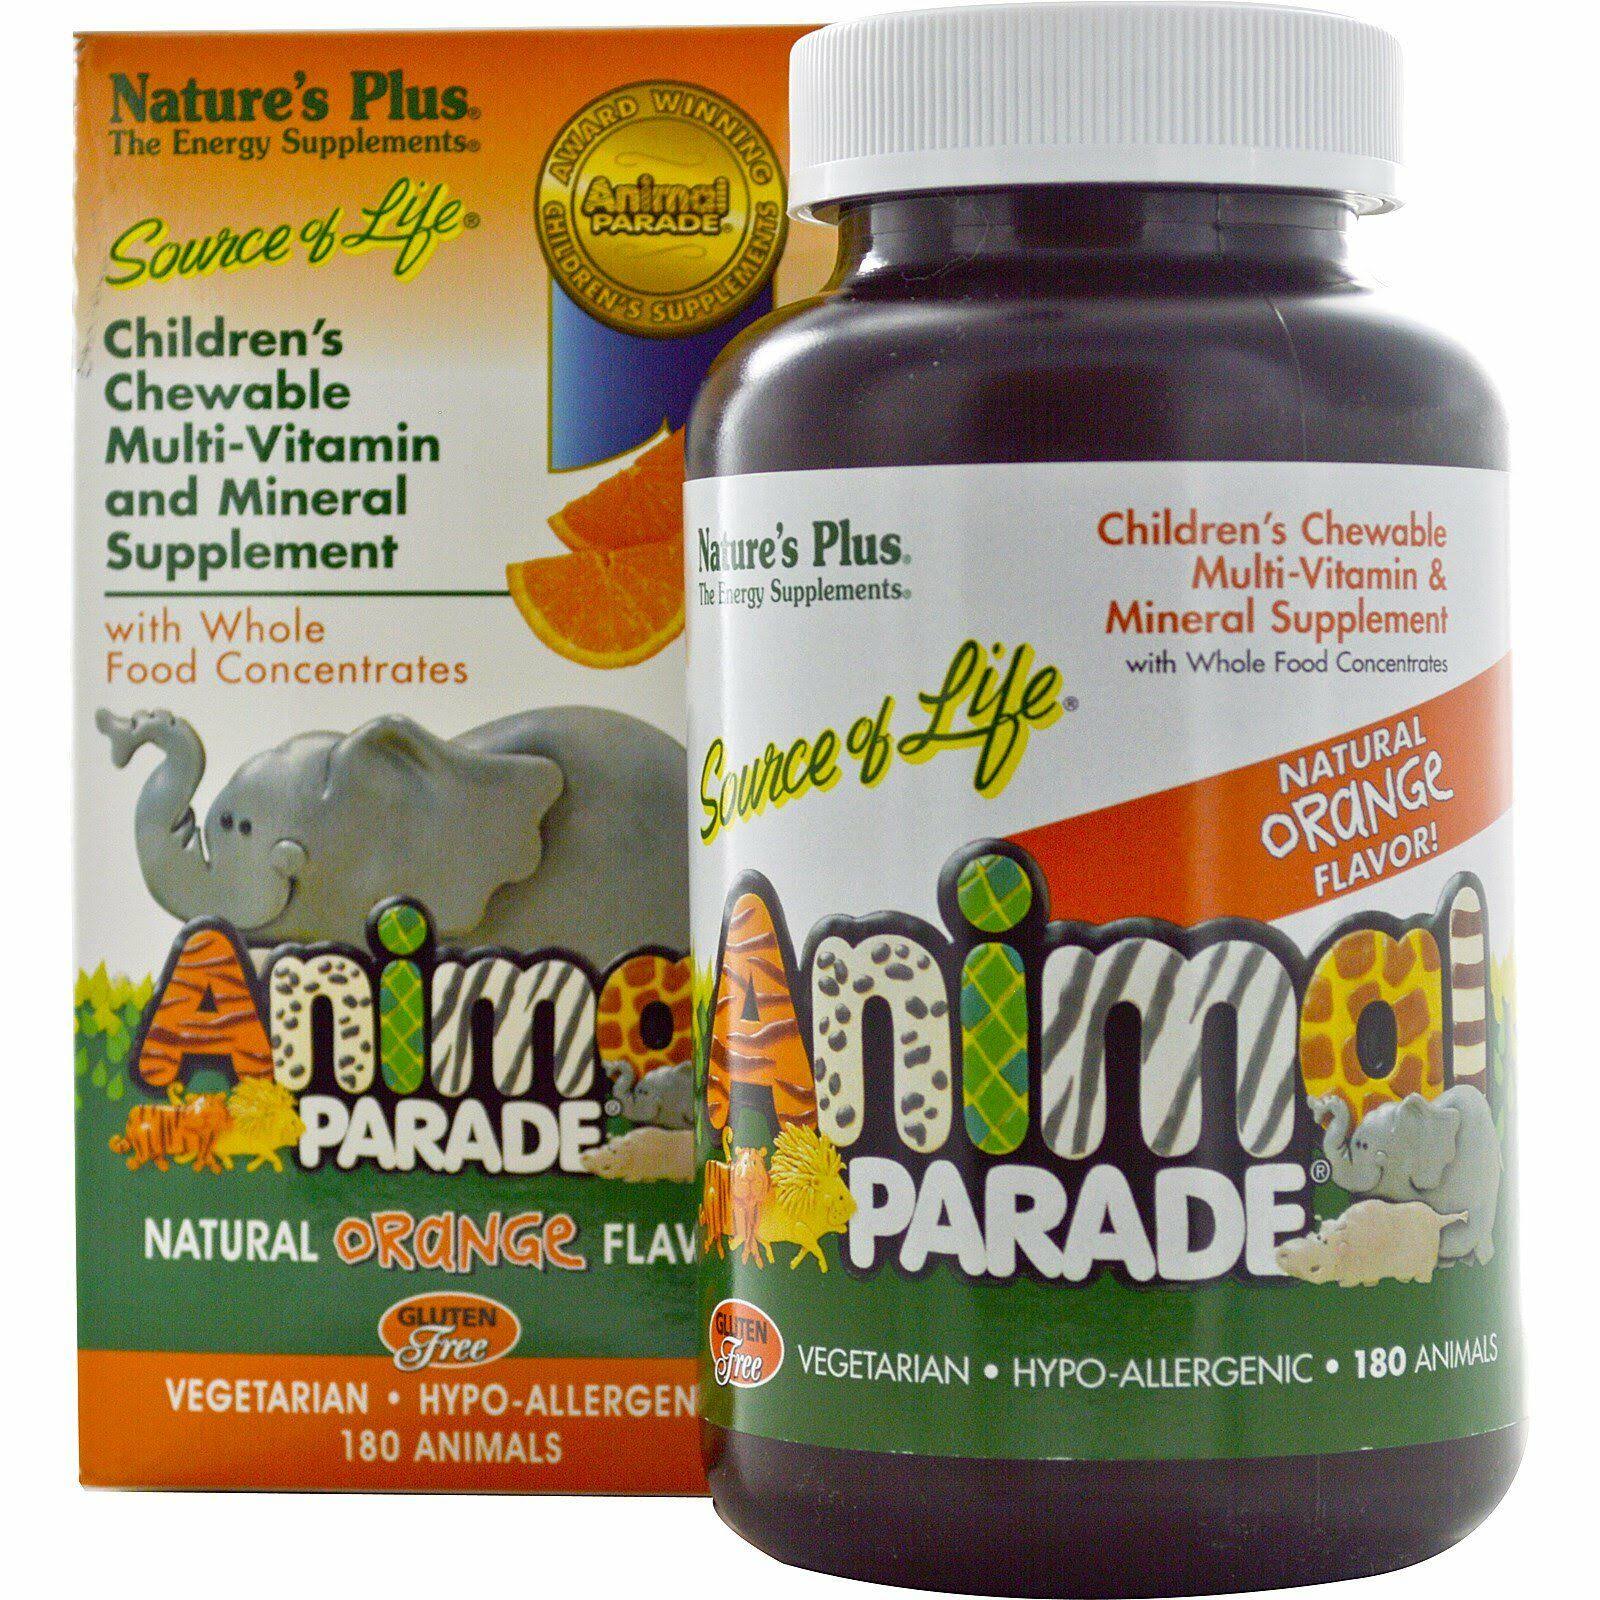 Nature's Plus Source of Life Animal Parade Children's Chewable Multi-Vitamin and Mineral Supplement Natural Orange Flavor 180 Animals